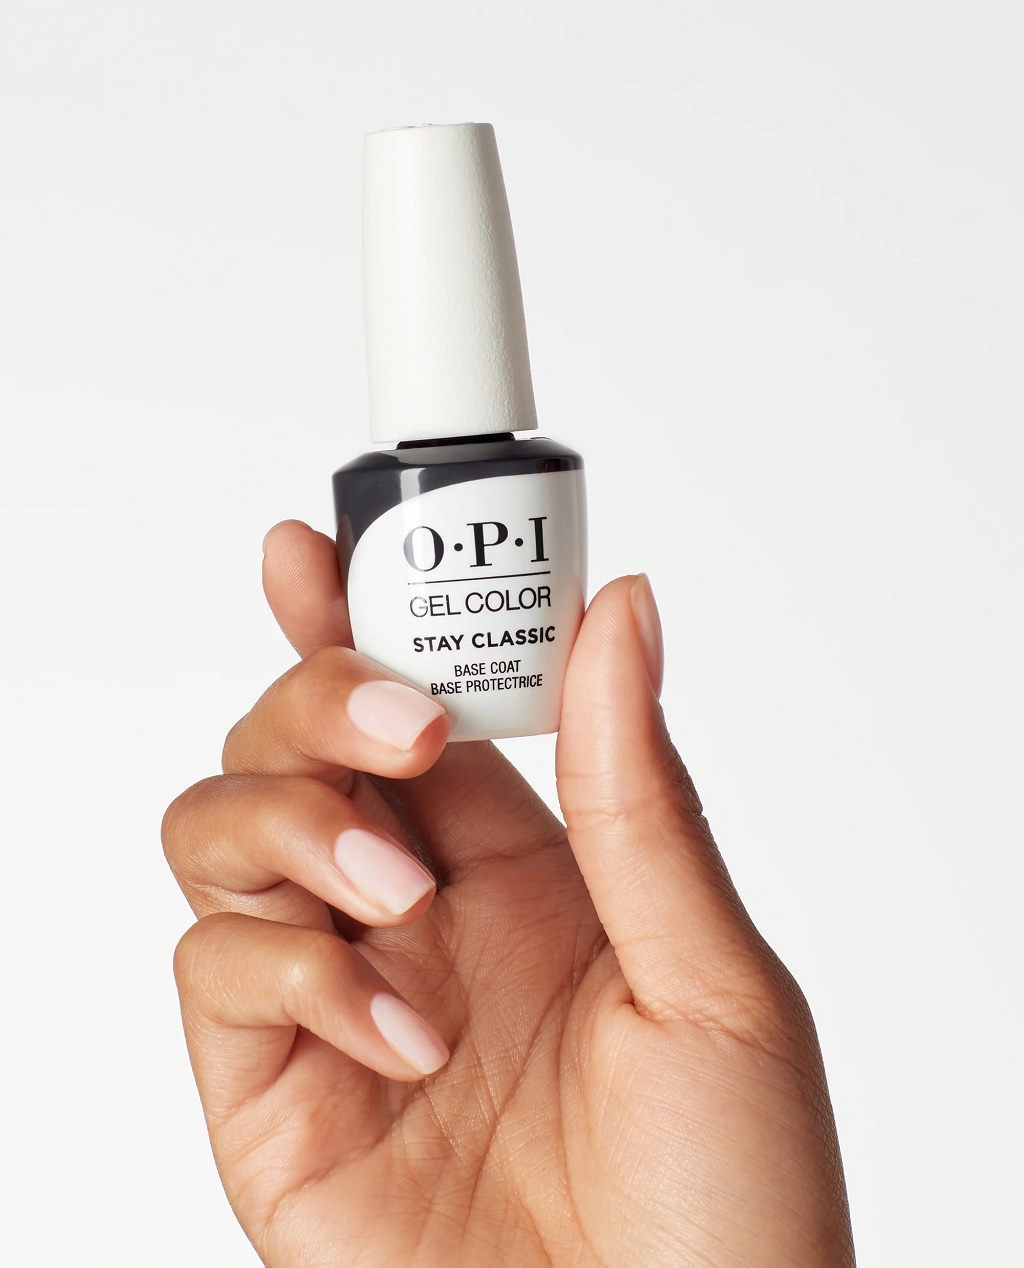 OPI Gelcolor Stay Classic Base Coat